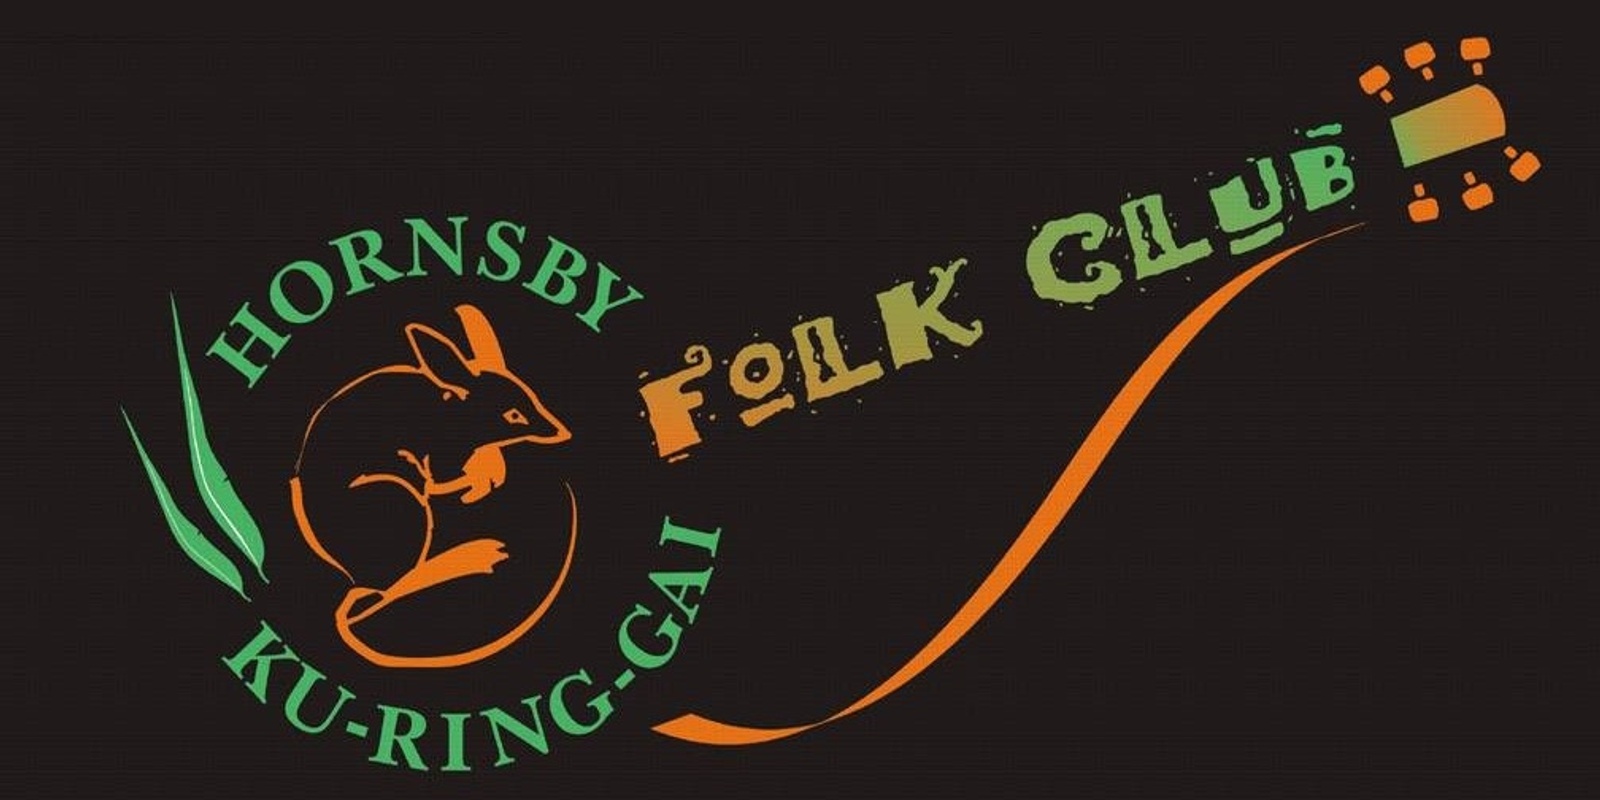 Banner image for Acoustic Music at Hornsby Ku-ring-gai Folk Club - April Feature Artist is "Cap in Hand"